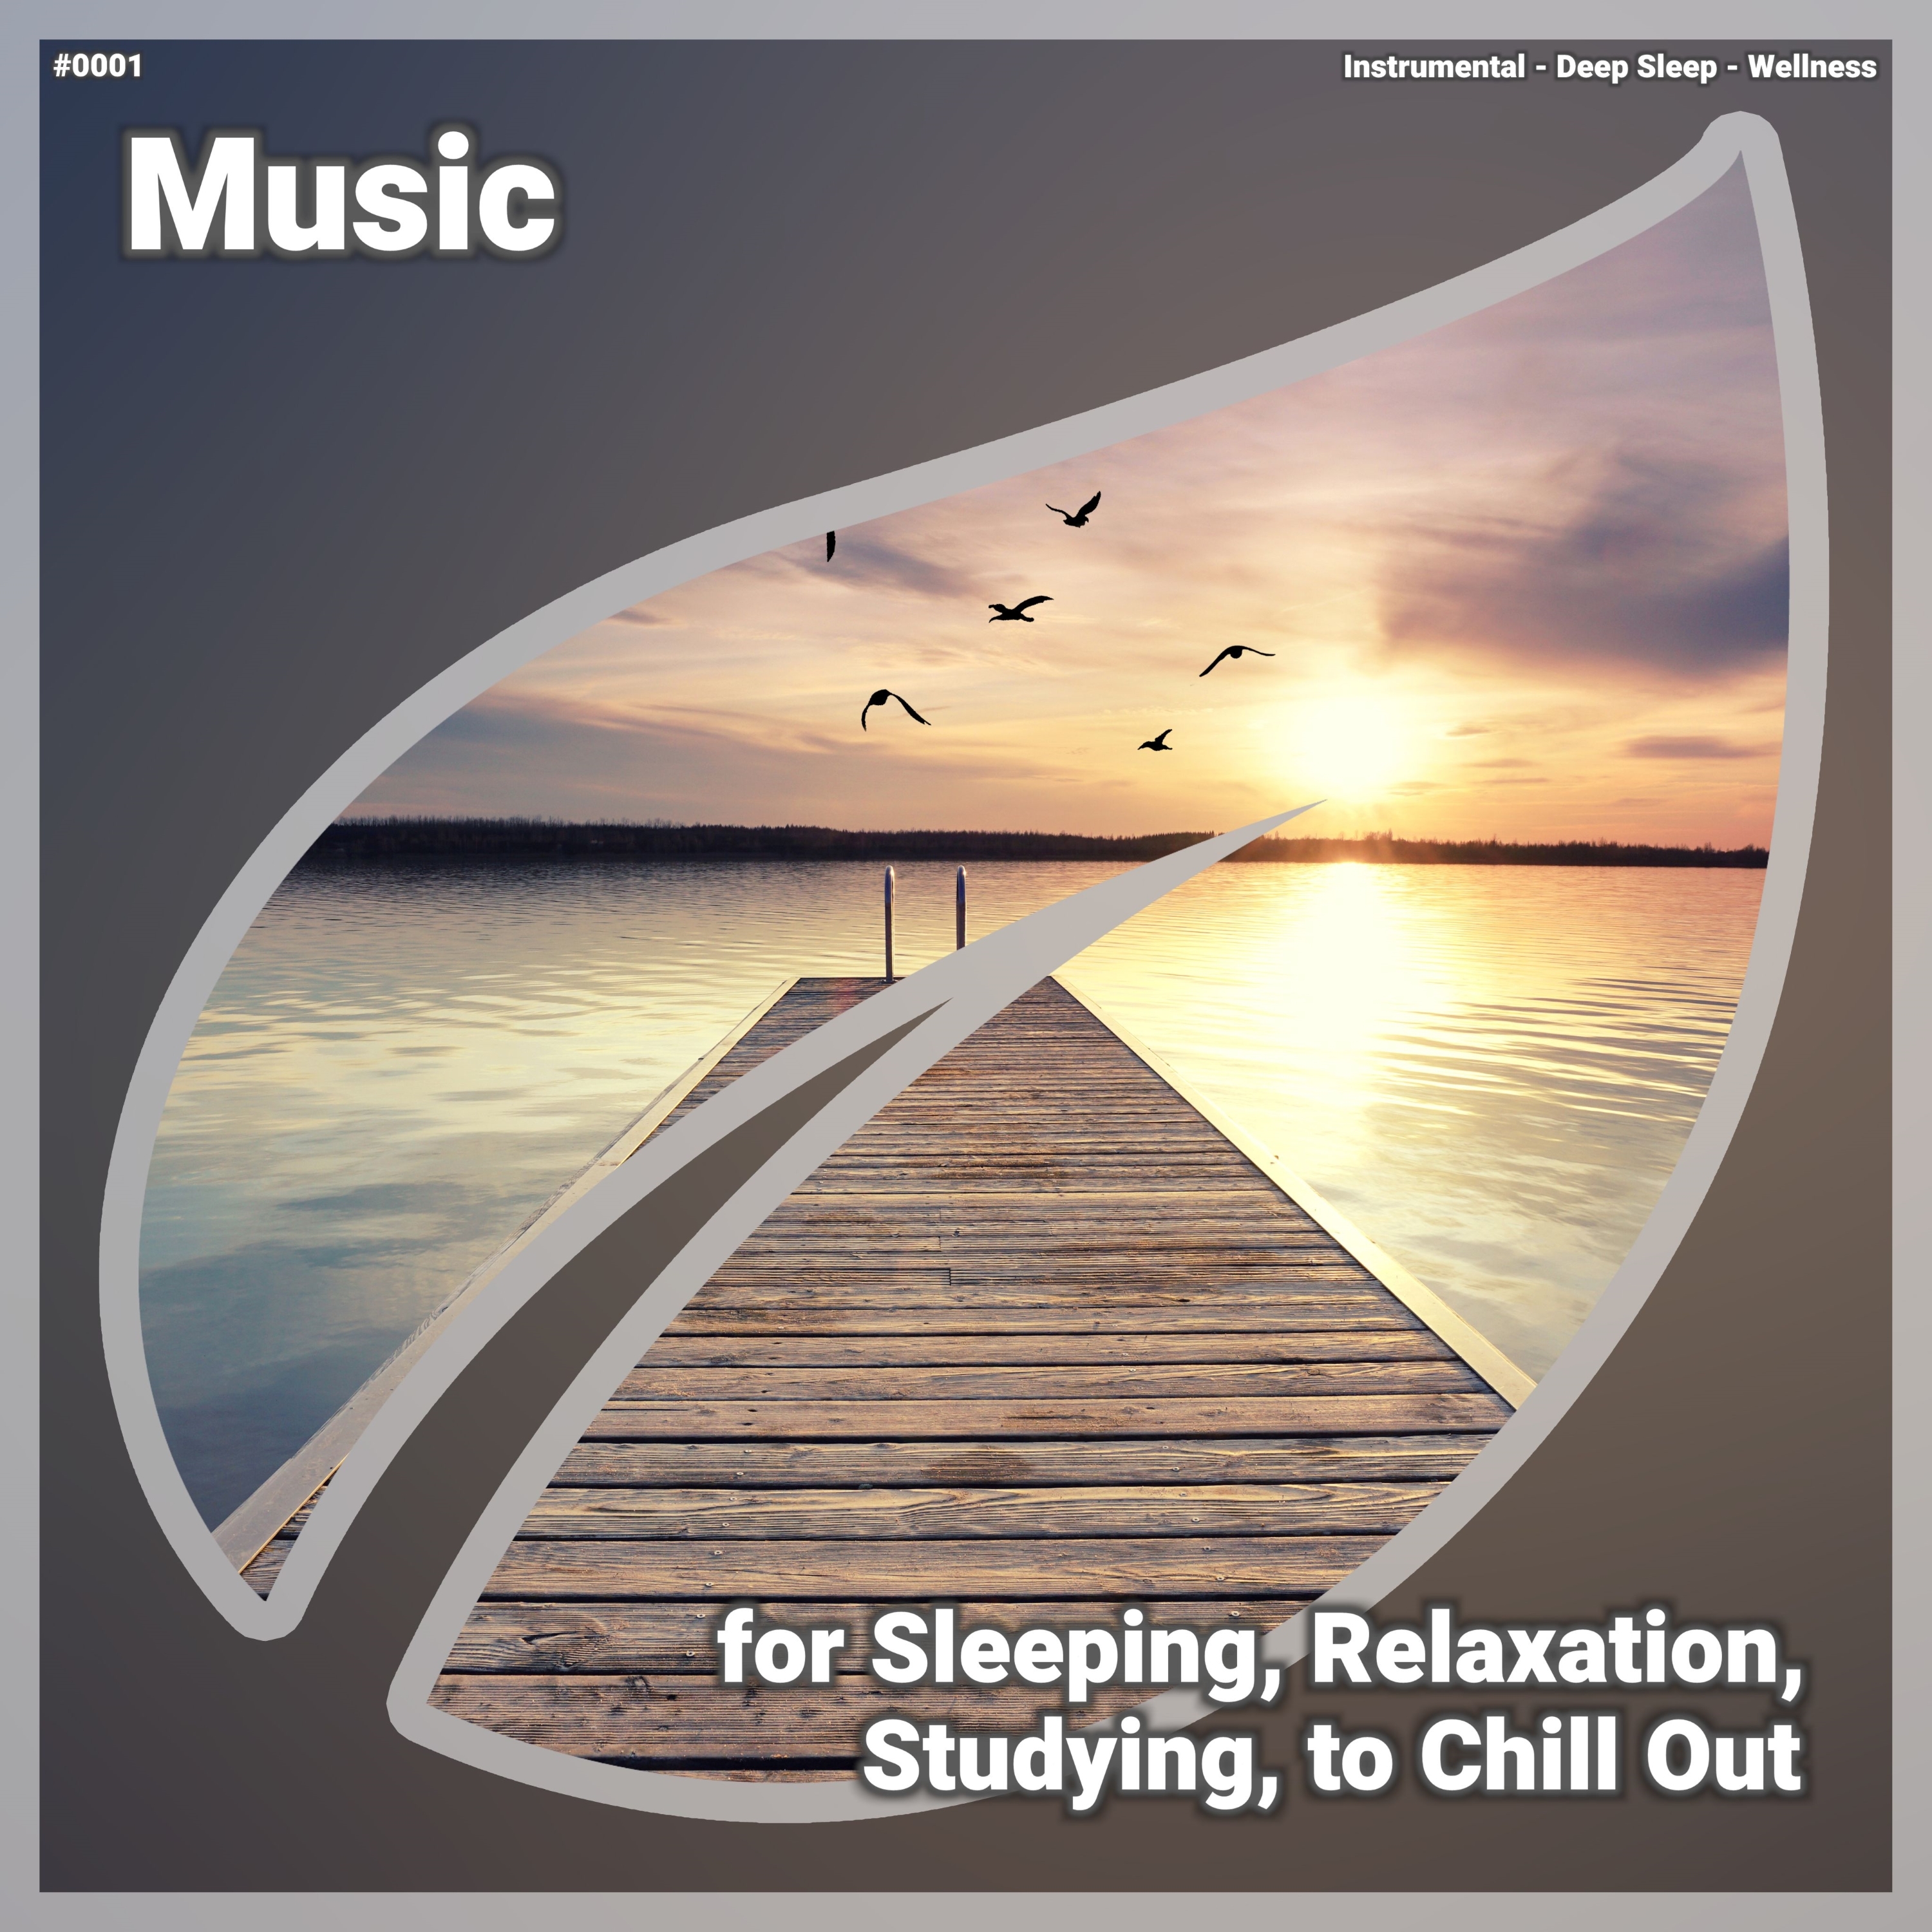 I-download Relaxing Music, Pt. 4